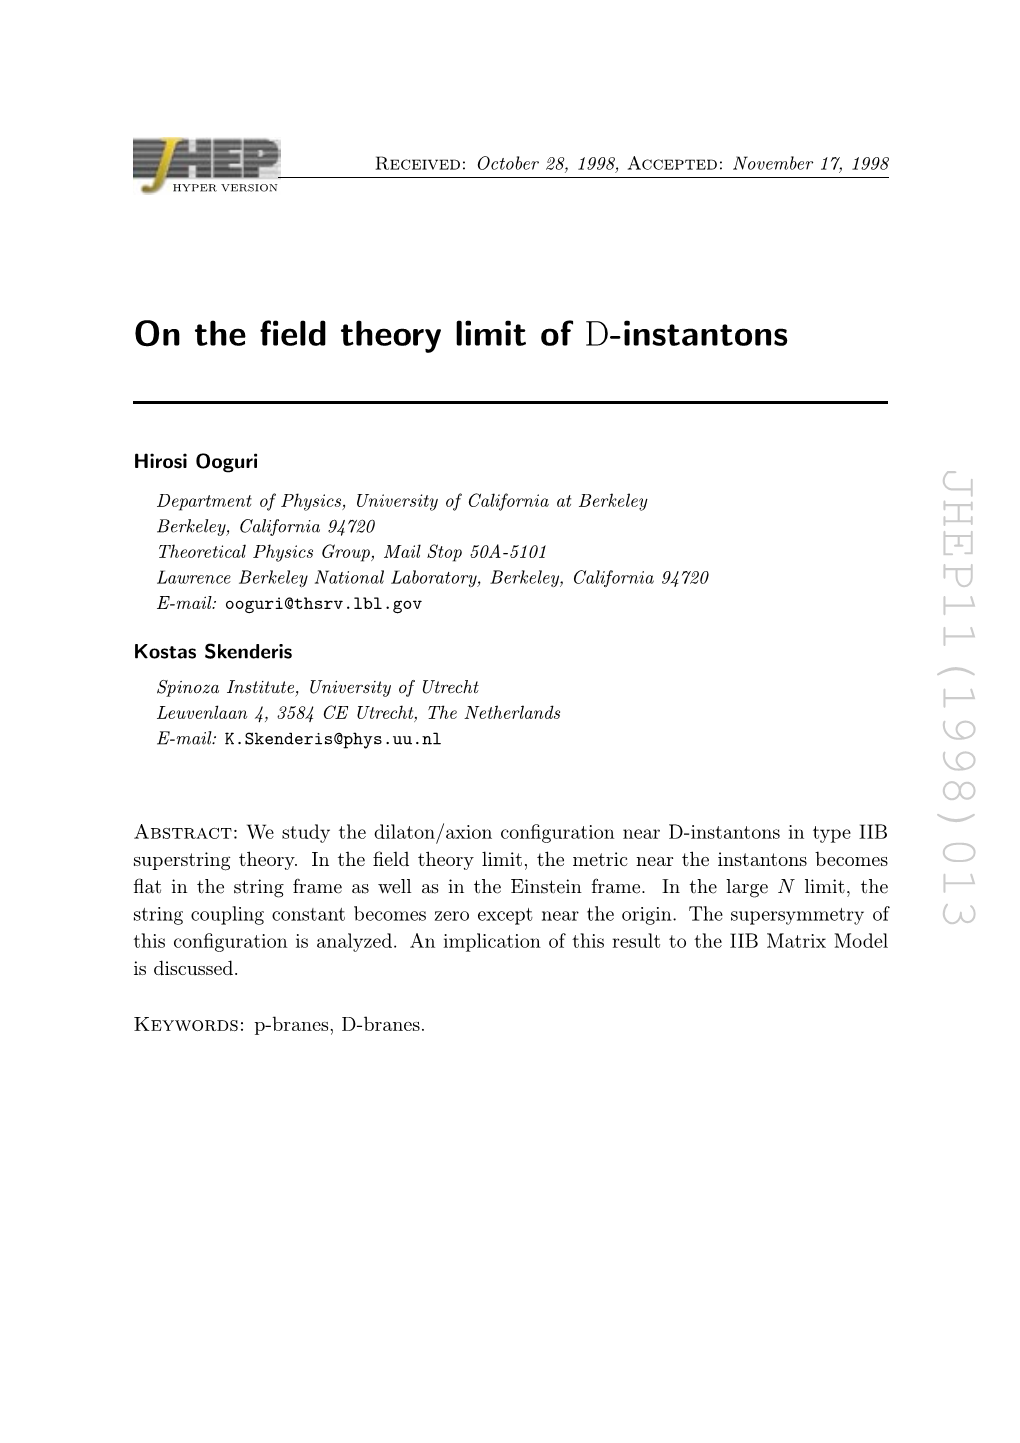 On the Field Theory Limit of D-Instantons